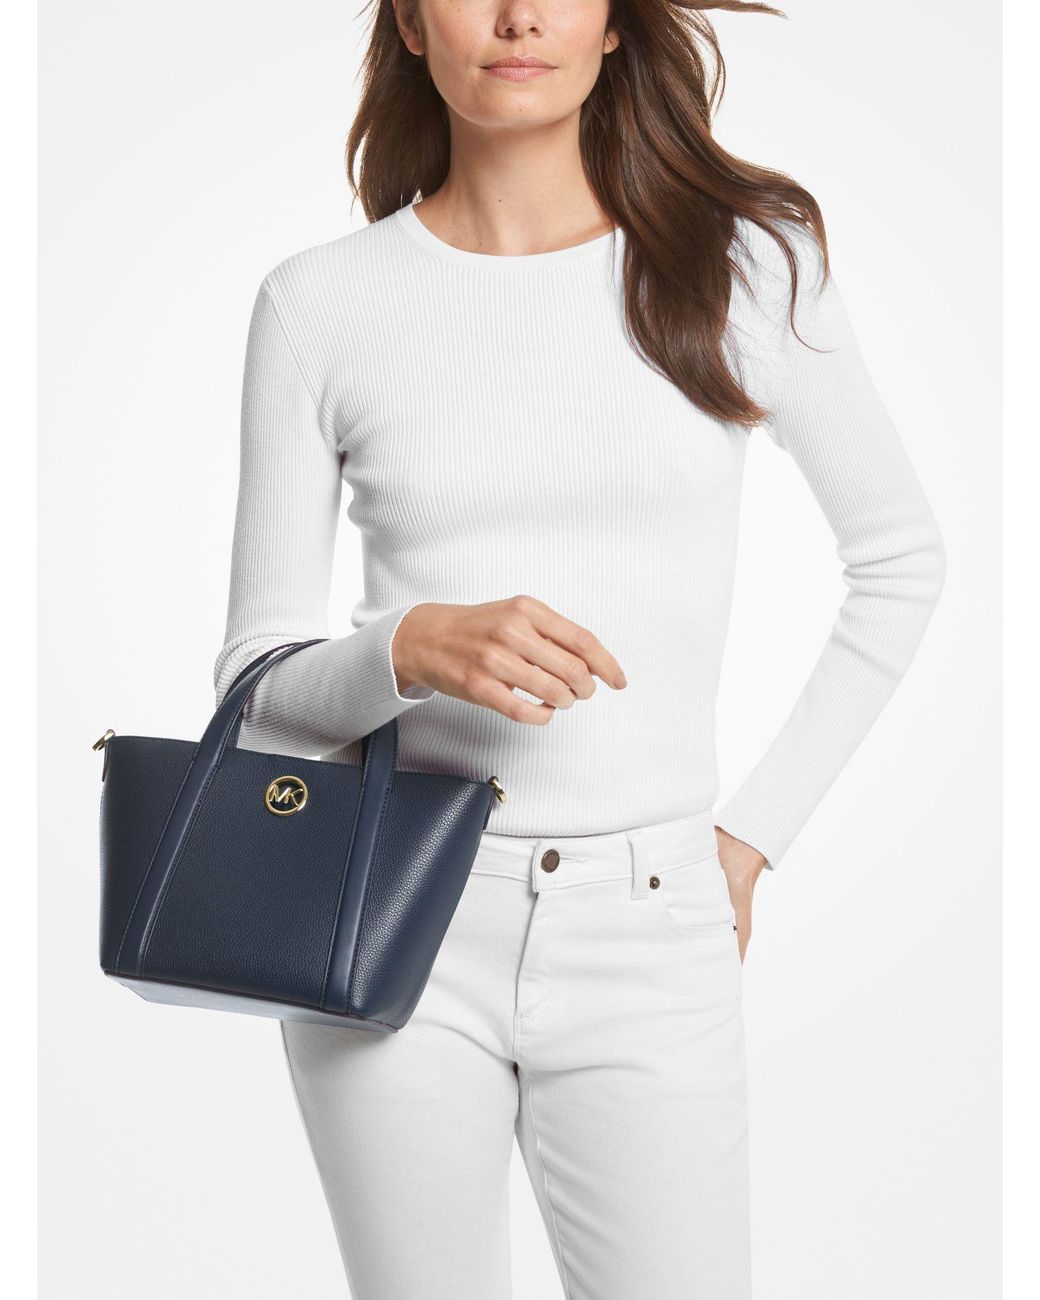 Michael Kors Hadleigh Small Leather Messenger Tote Bag in Blue | Lyst  Australia